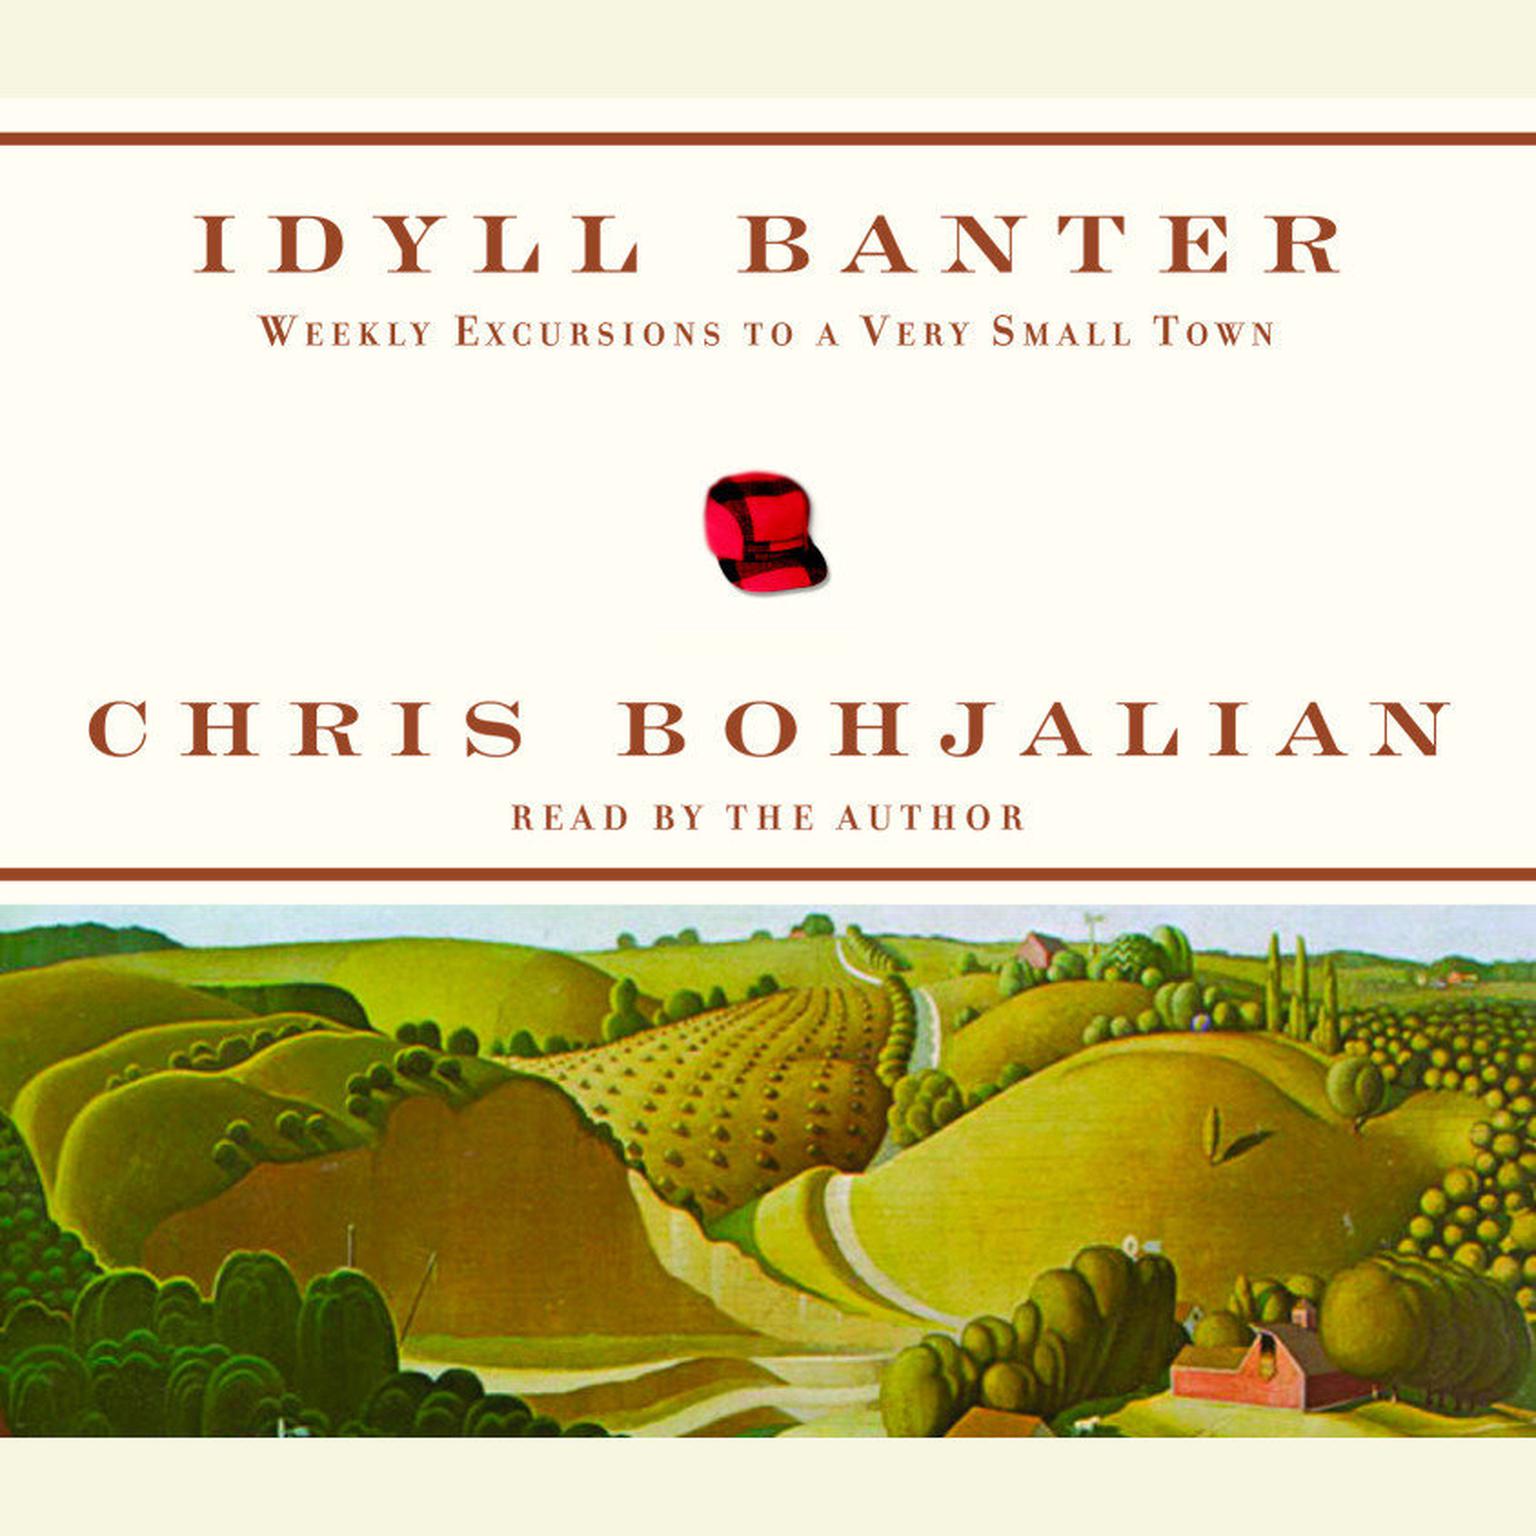 Idyll Banter (Abridged): Weekly Excursions to a Very Small Town Audiobook, by Chris Bohjalian